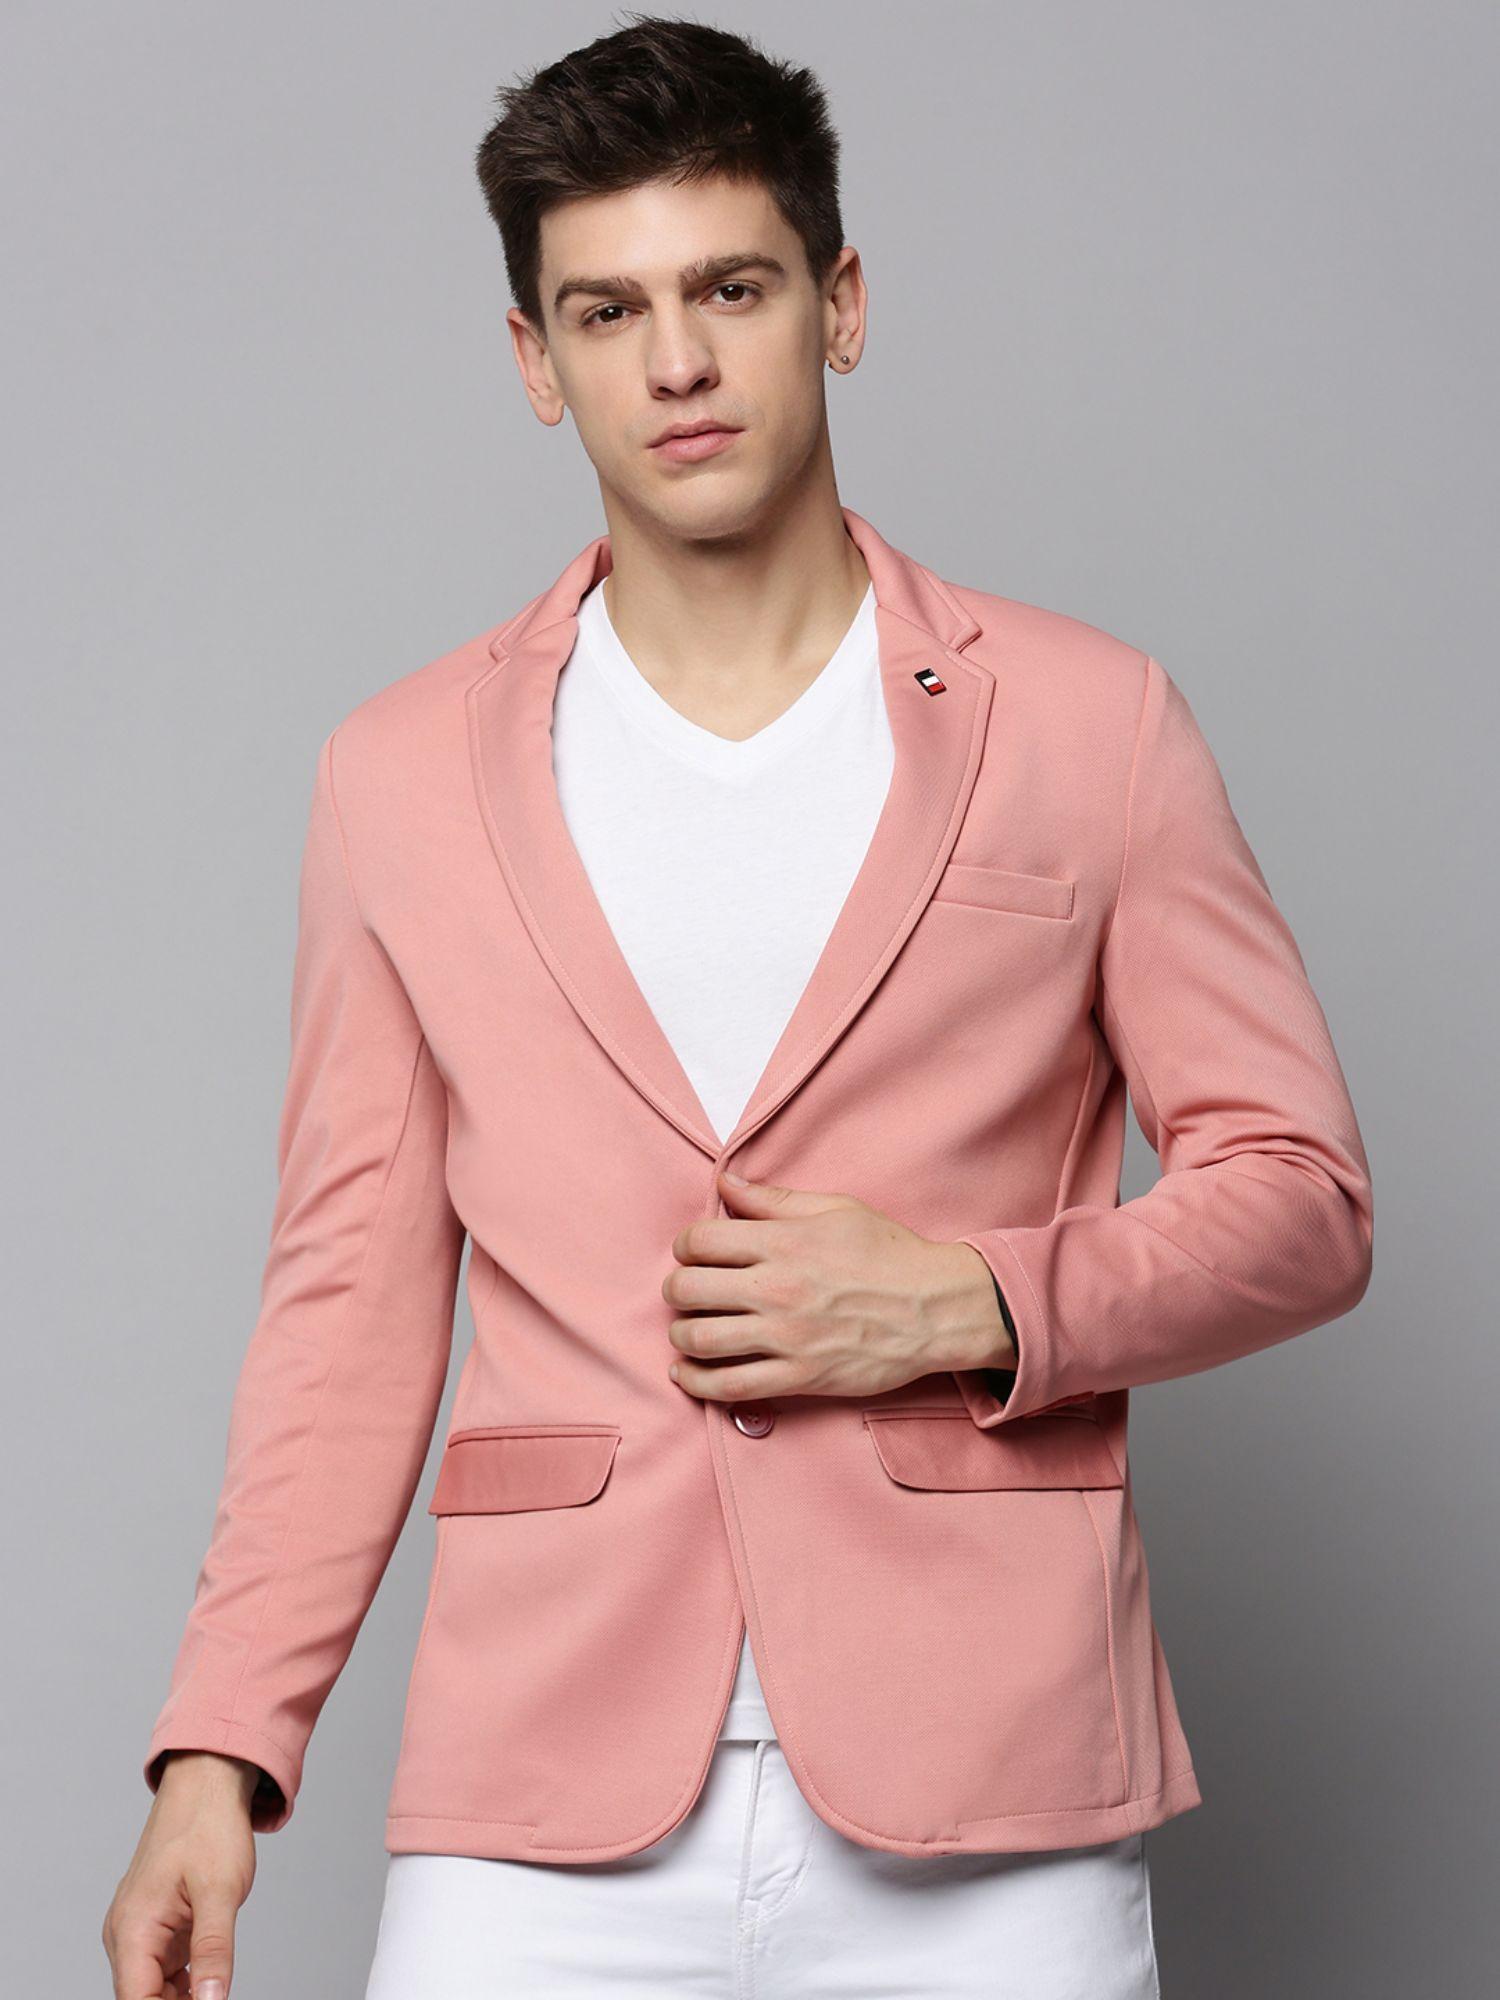 mens notched lapel solid pink open front blazer